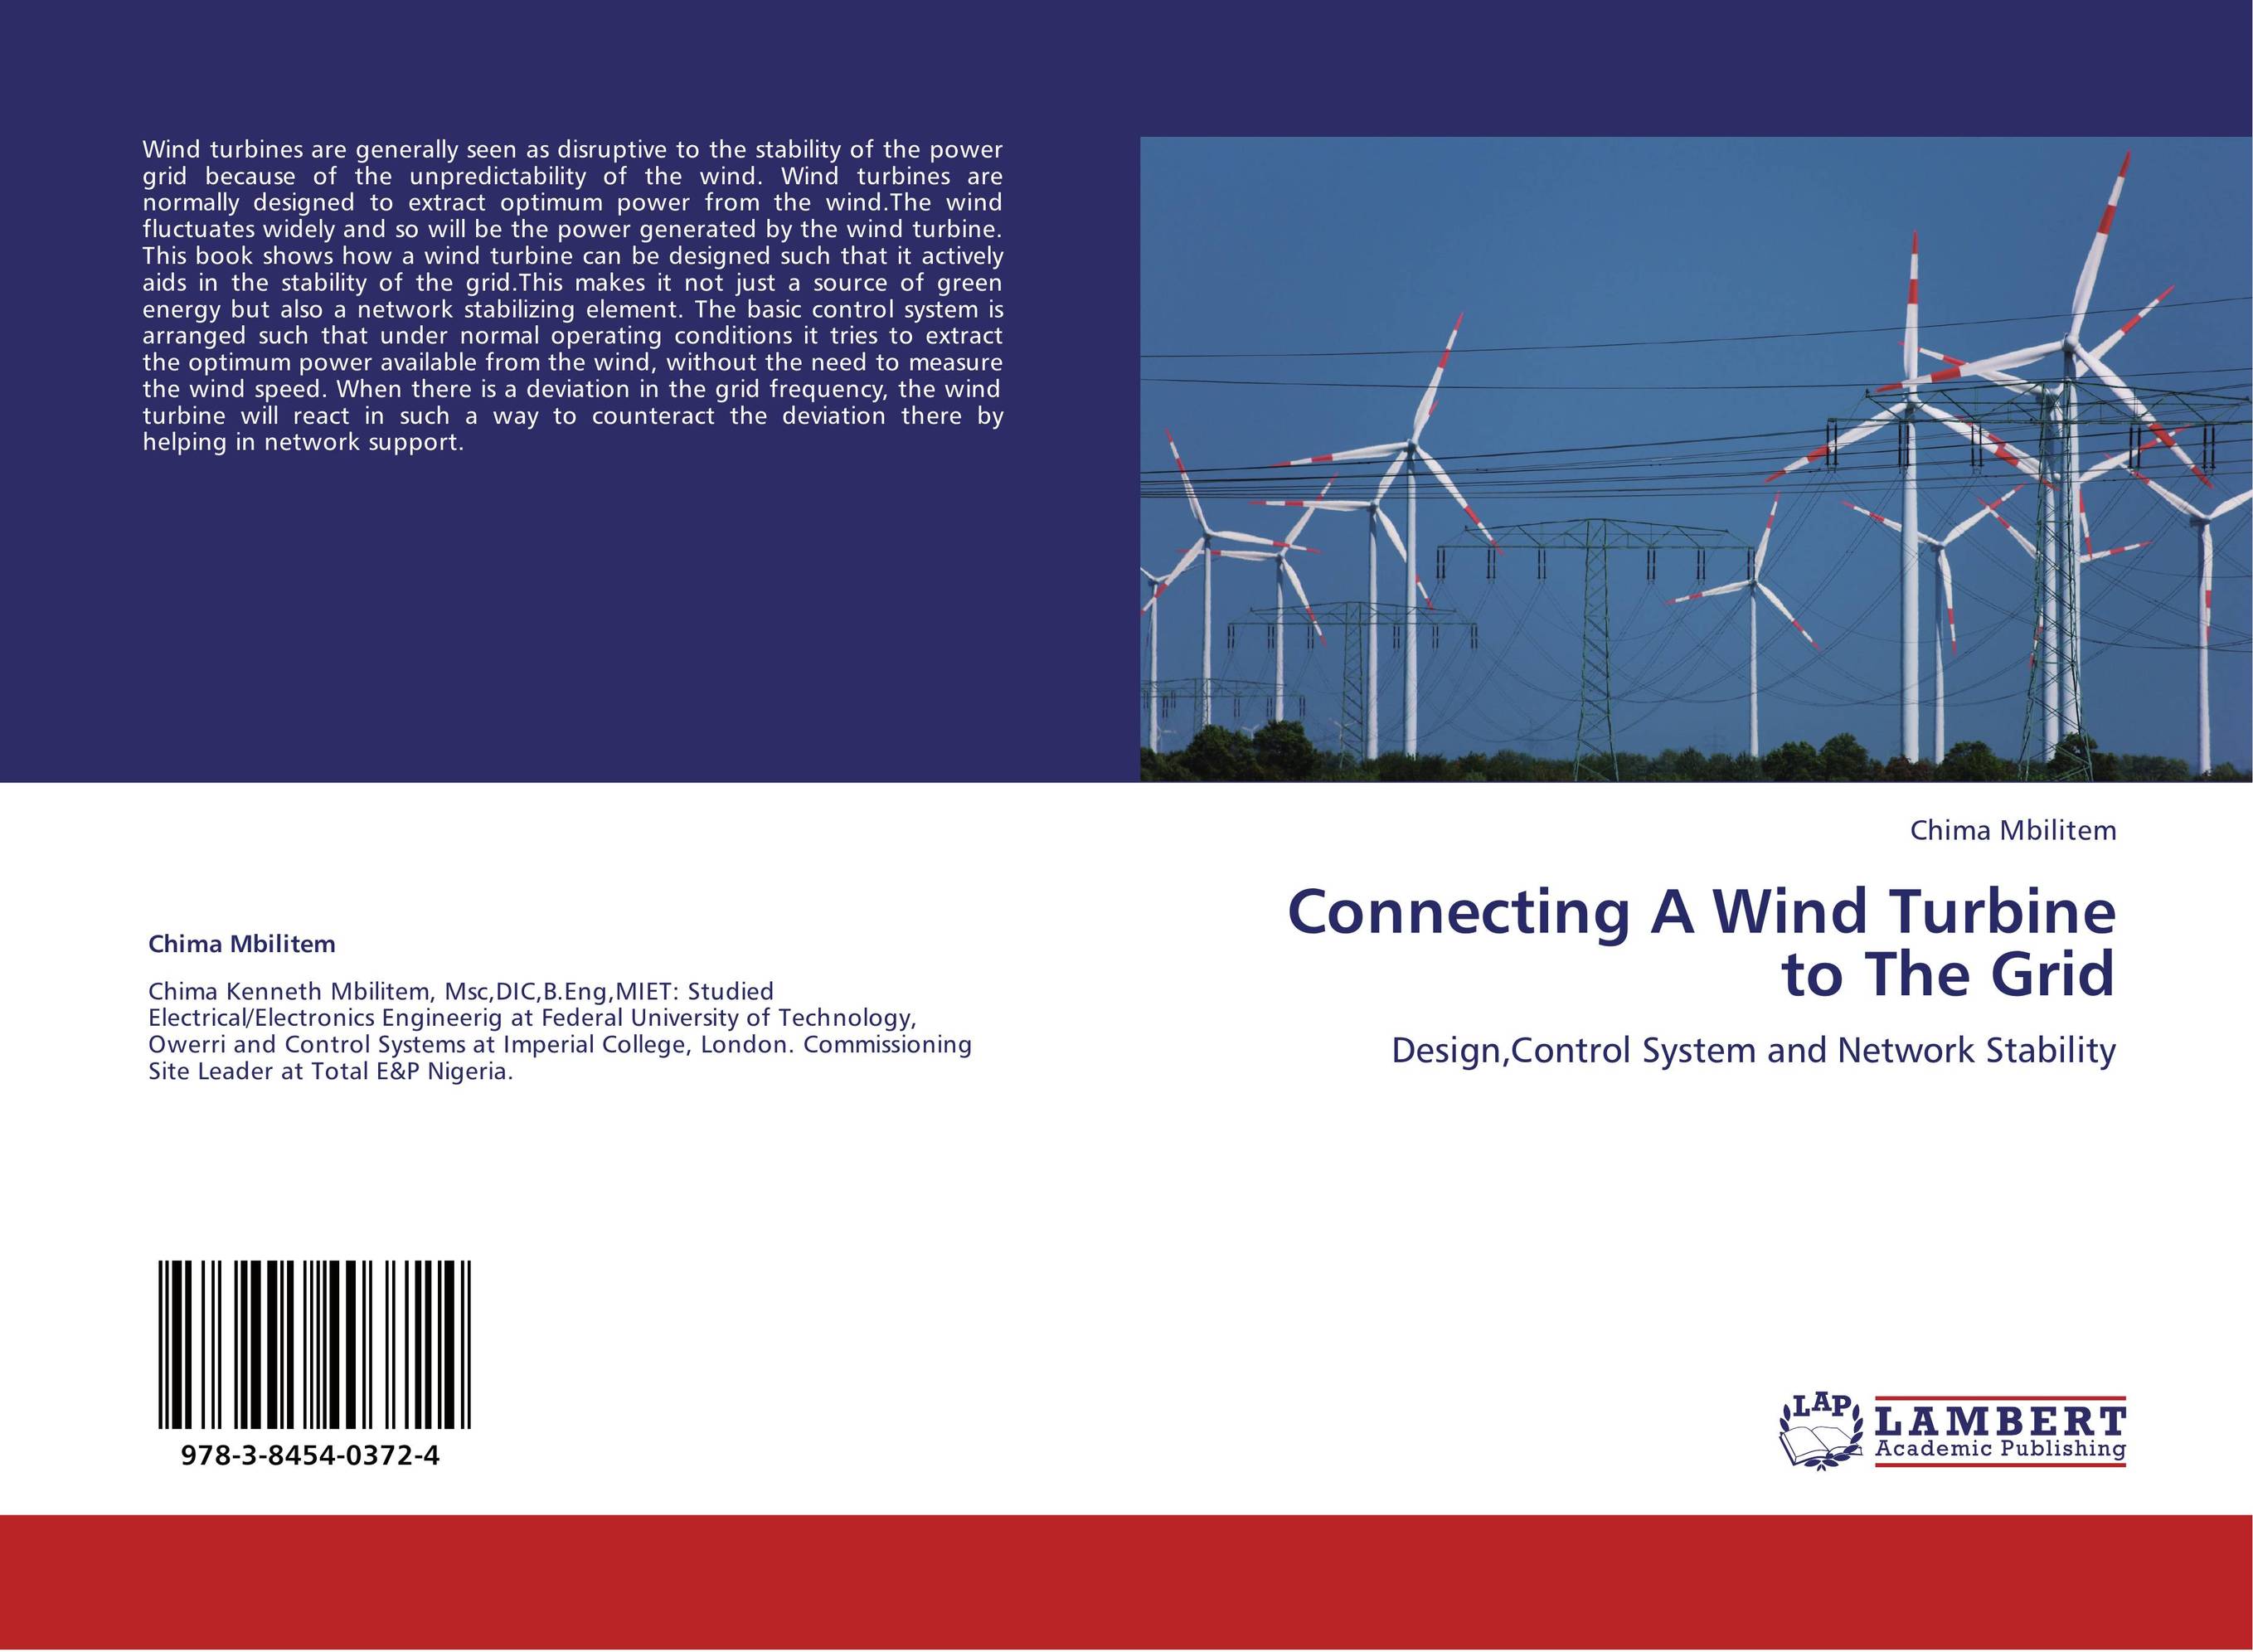 Control net stable. Ветряные книги. First u.s. Company to License disruptive Wind Power Technology.